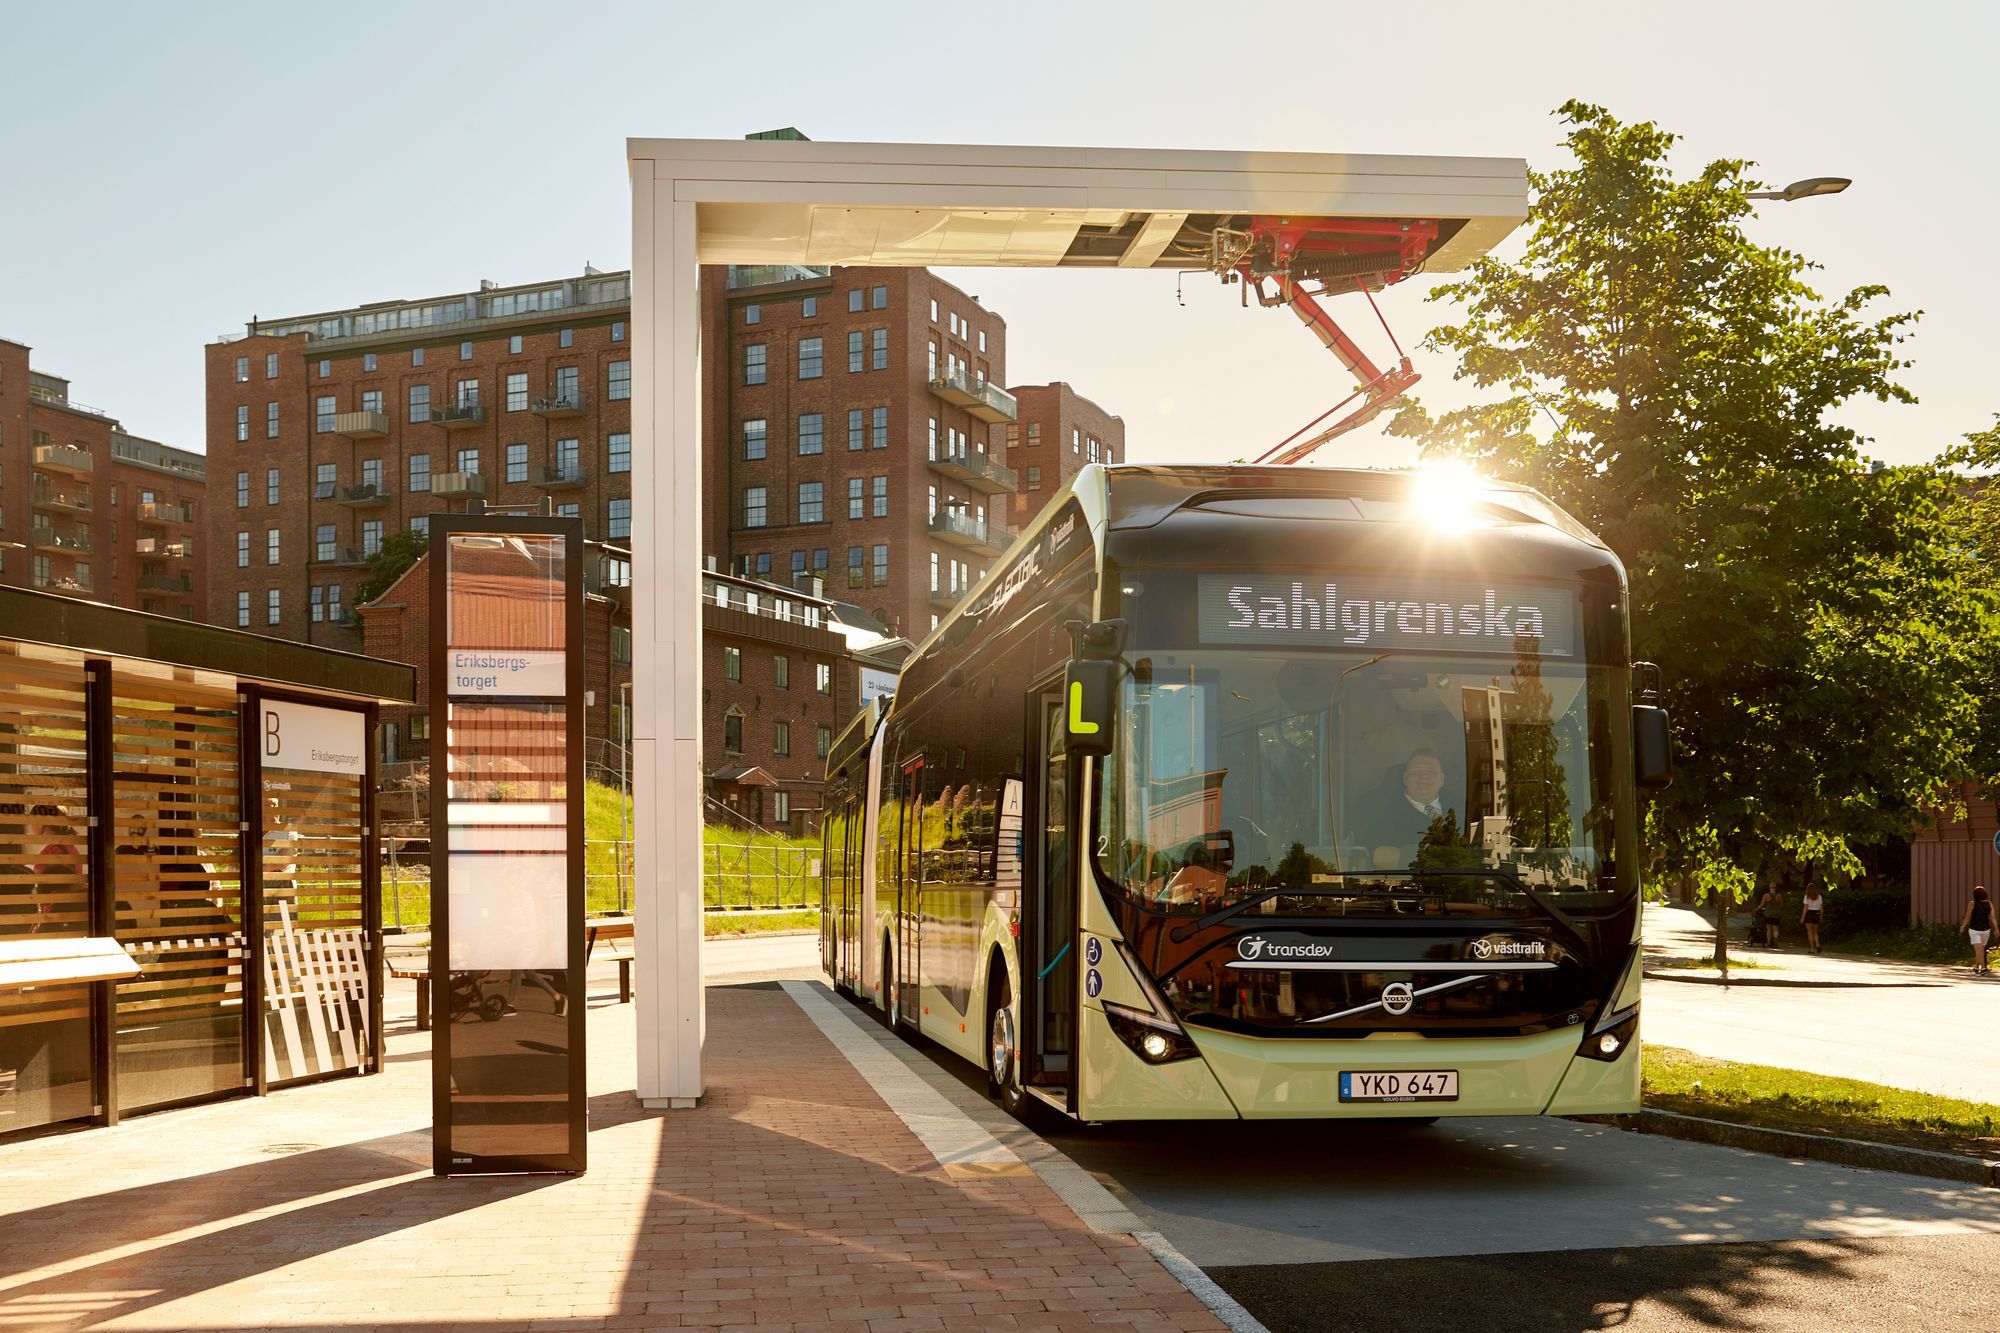 🚌 Electric buses mean better health for residents